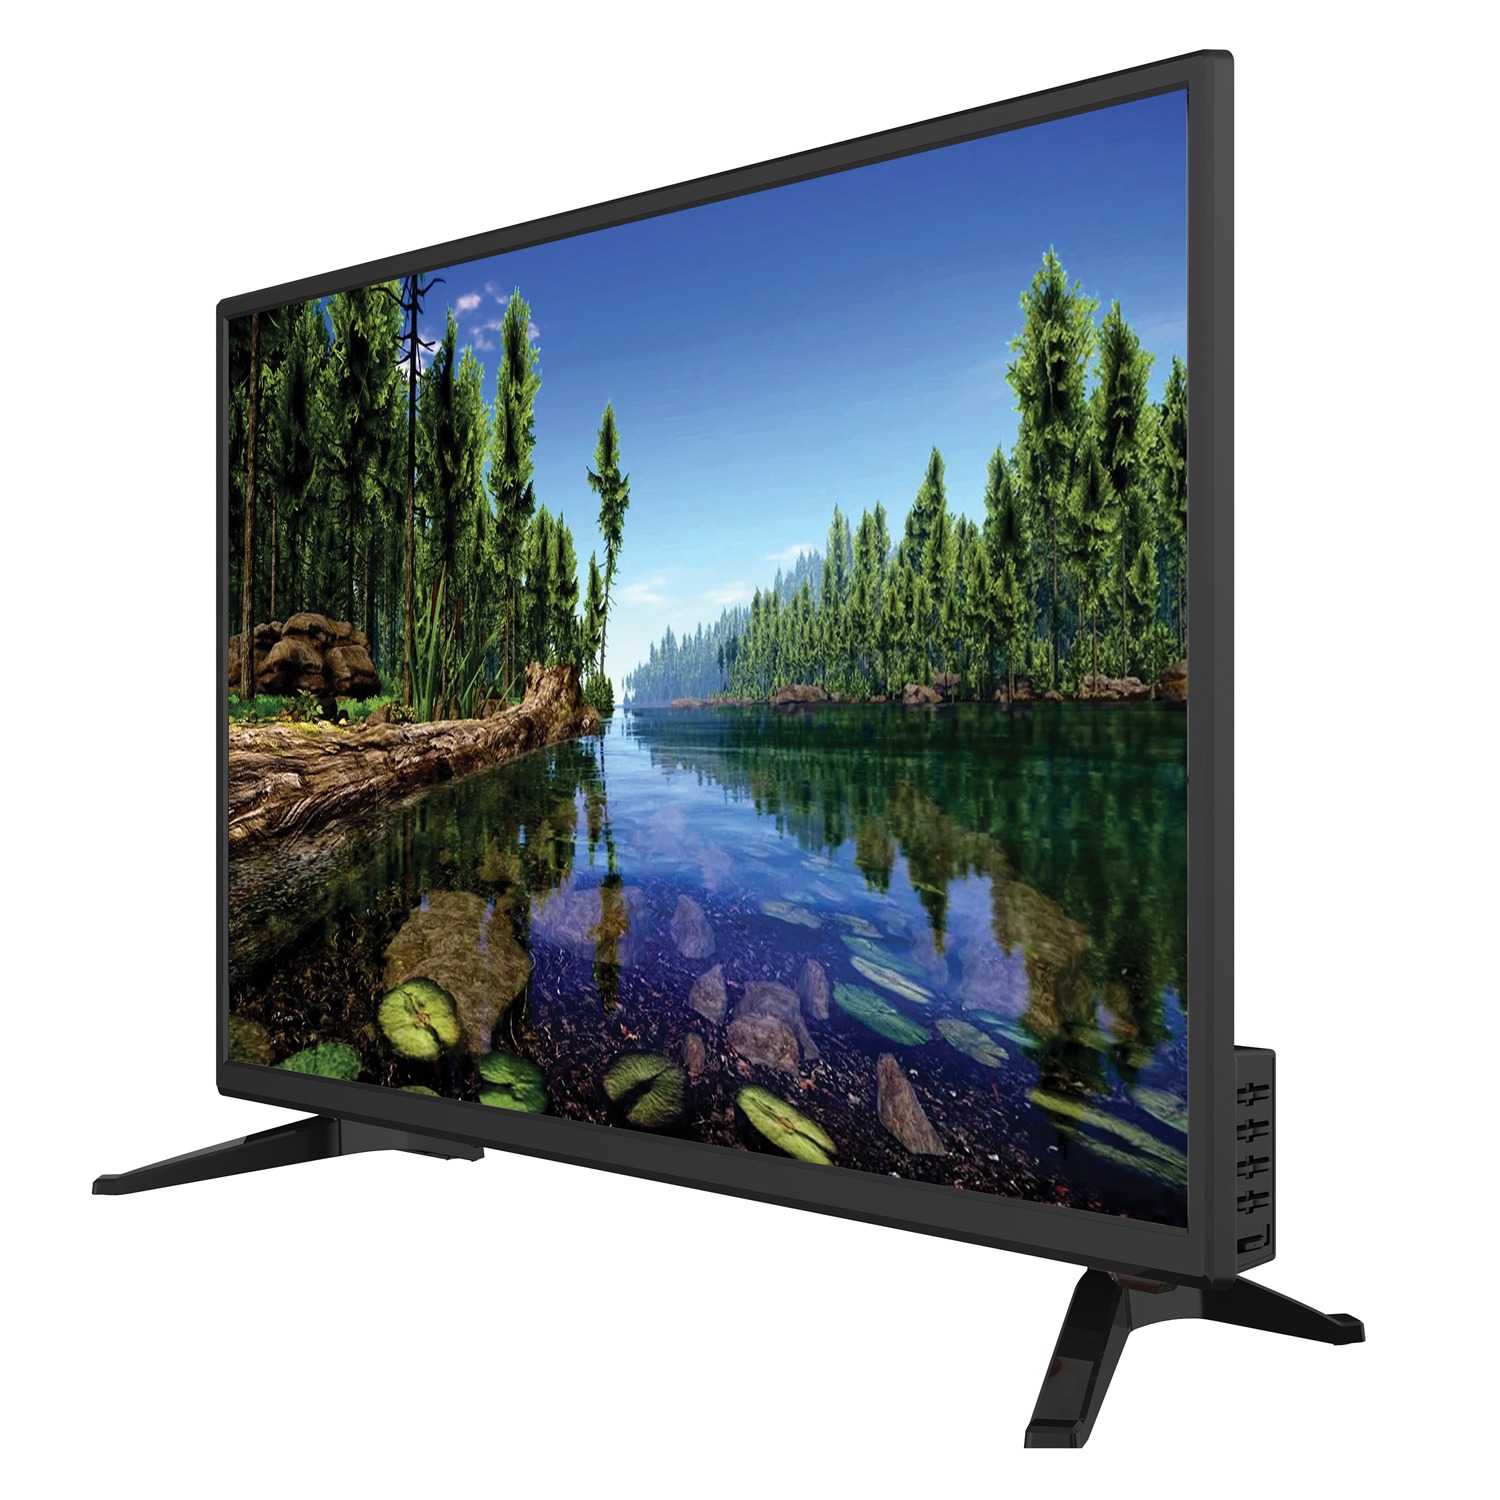 Supersonic 32” Widescreen LED HDTV with DVD